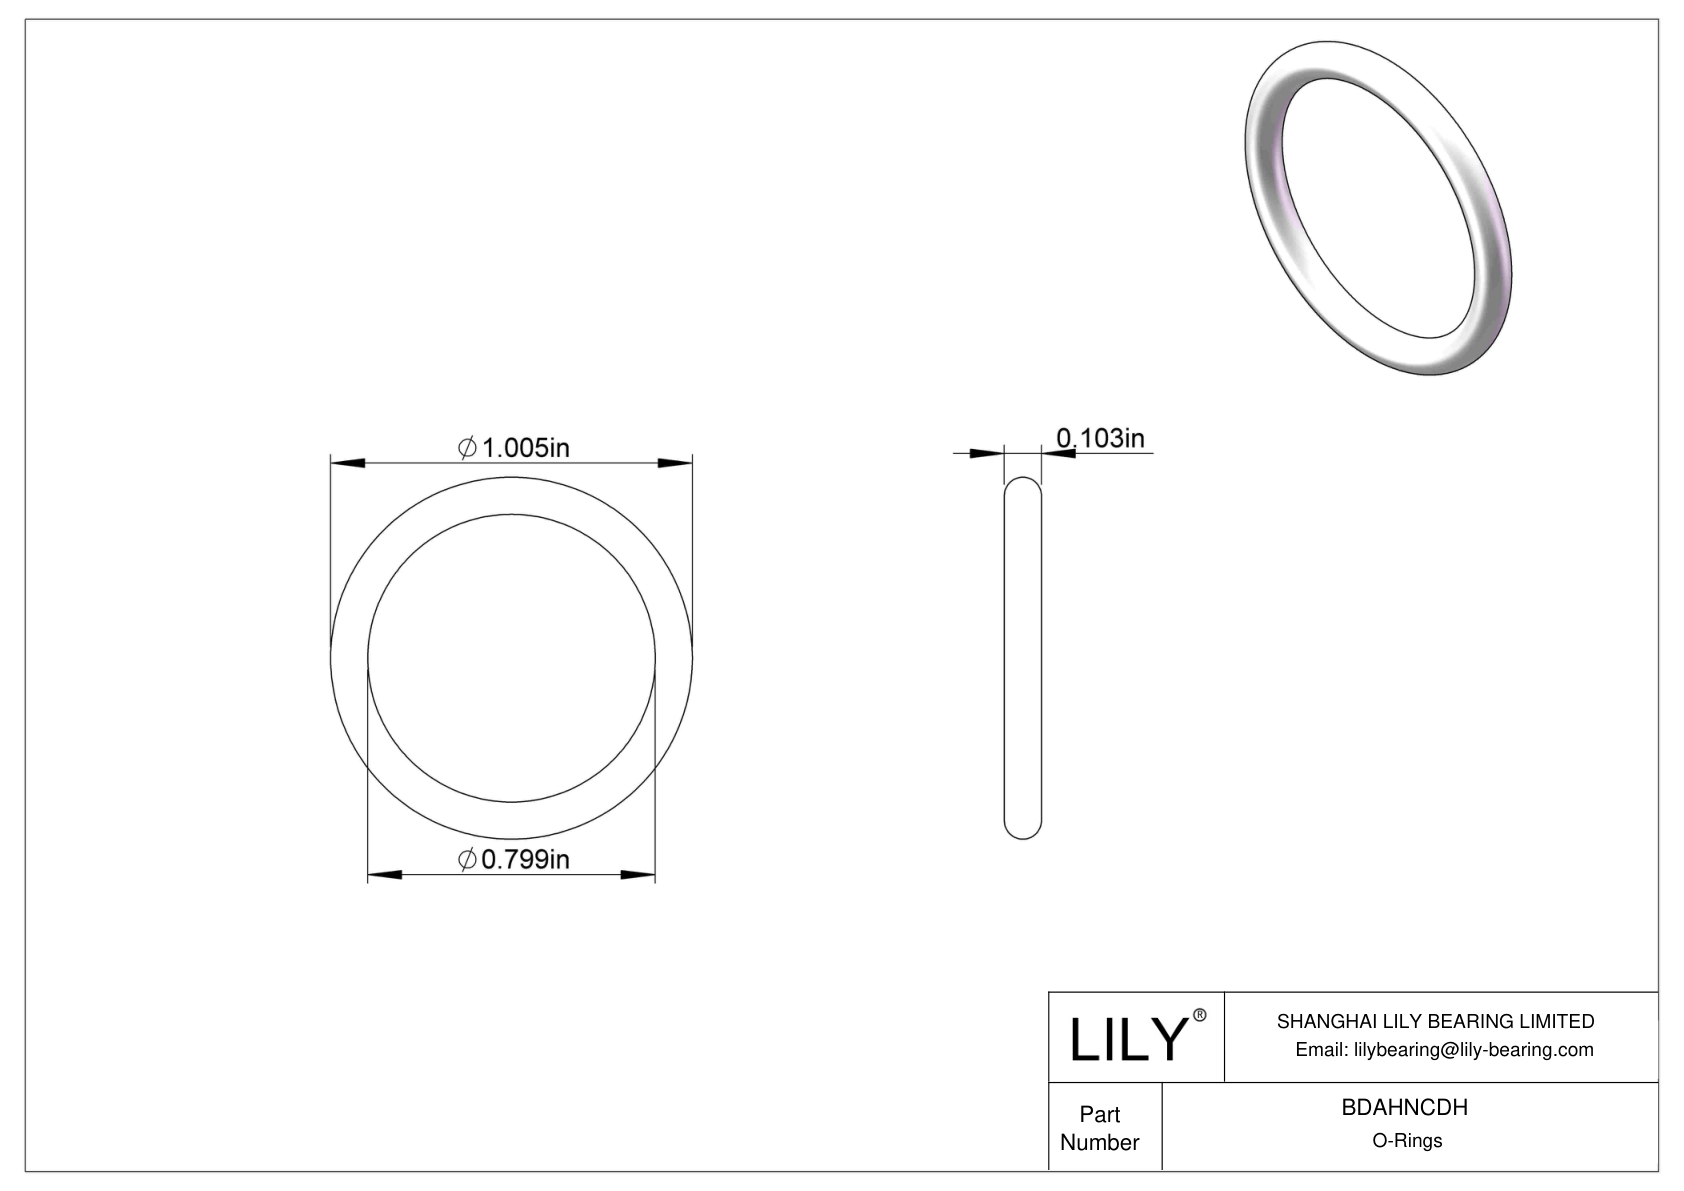 BDAHNCDH Oil Resistant O-Rings Round cad drawing